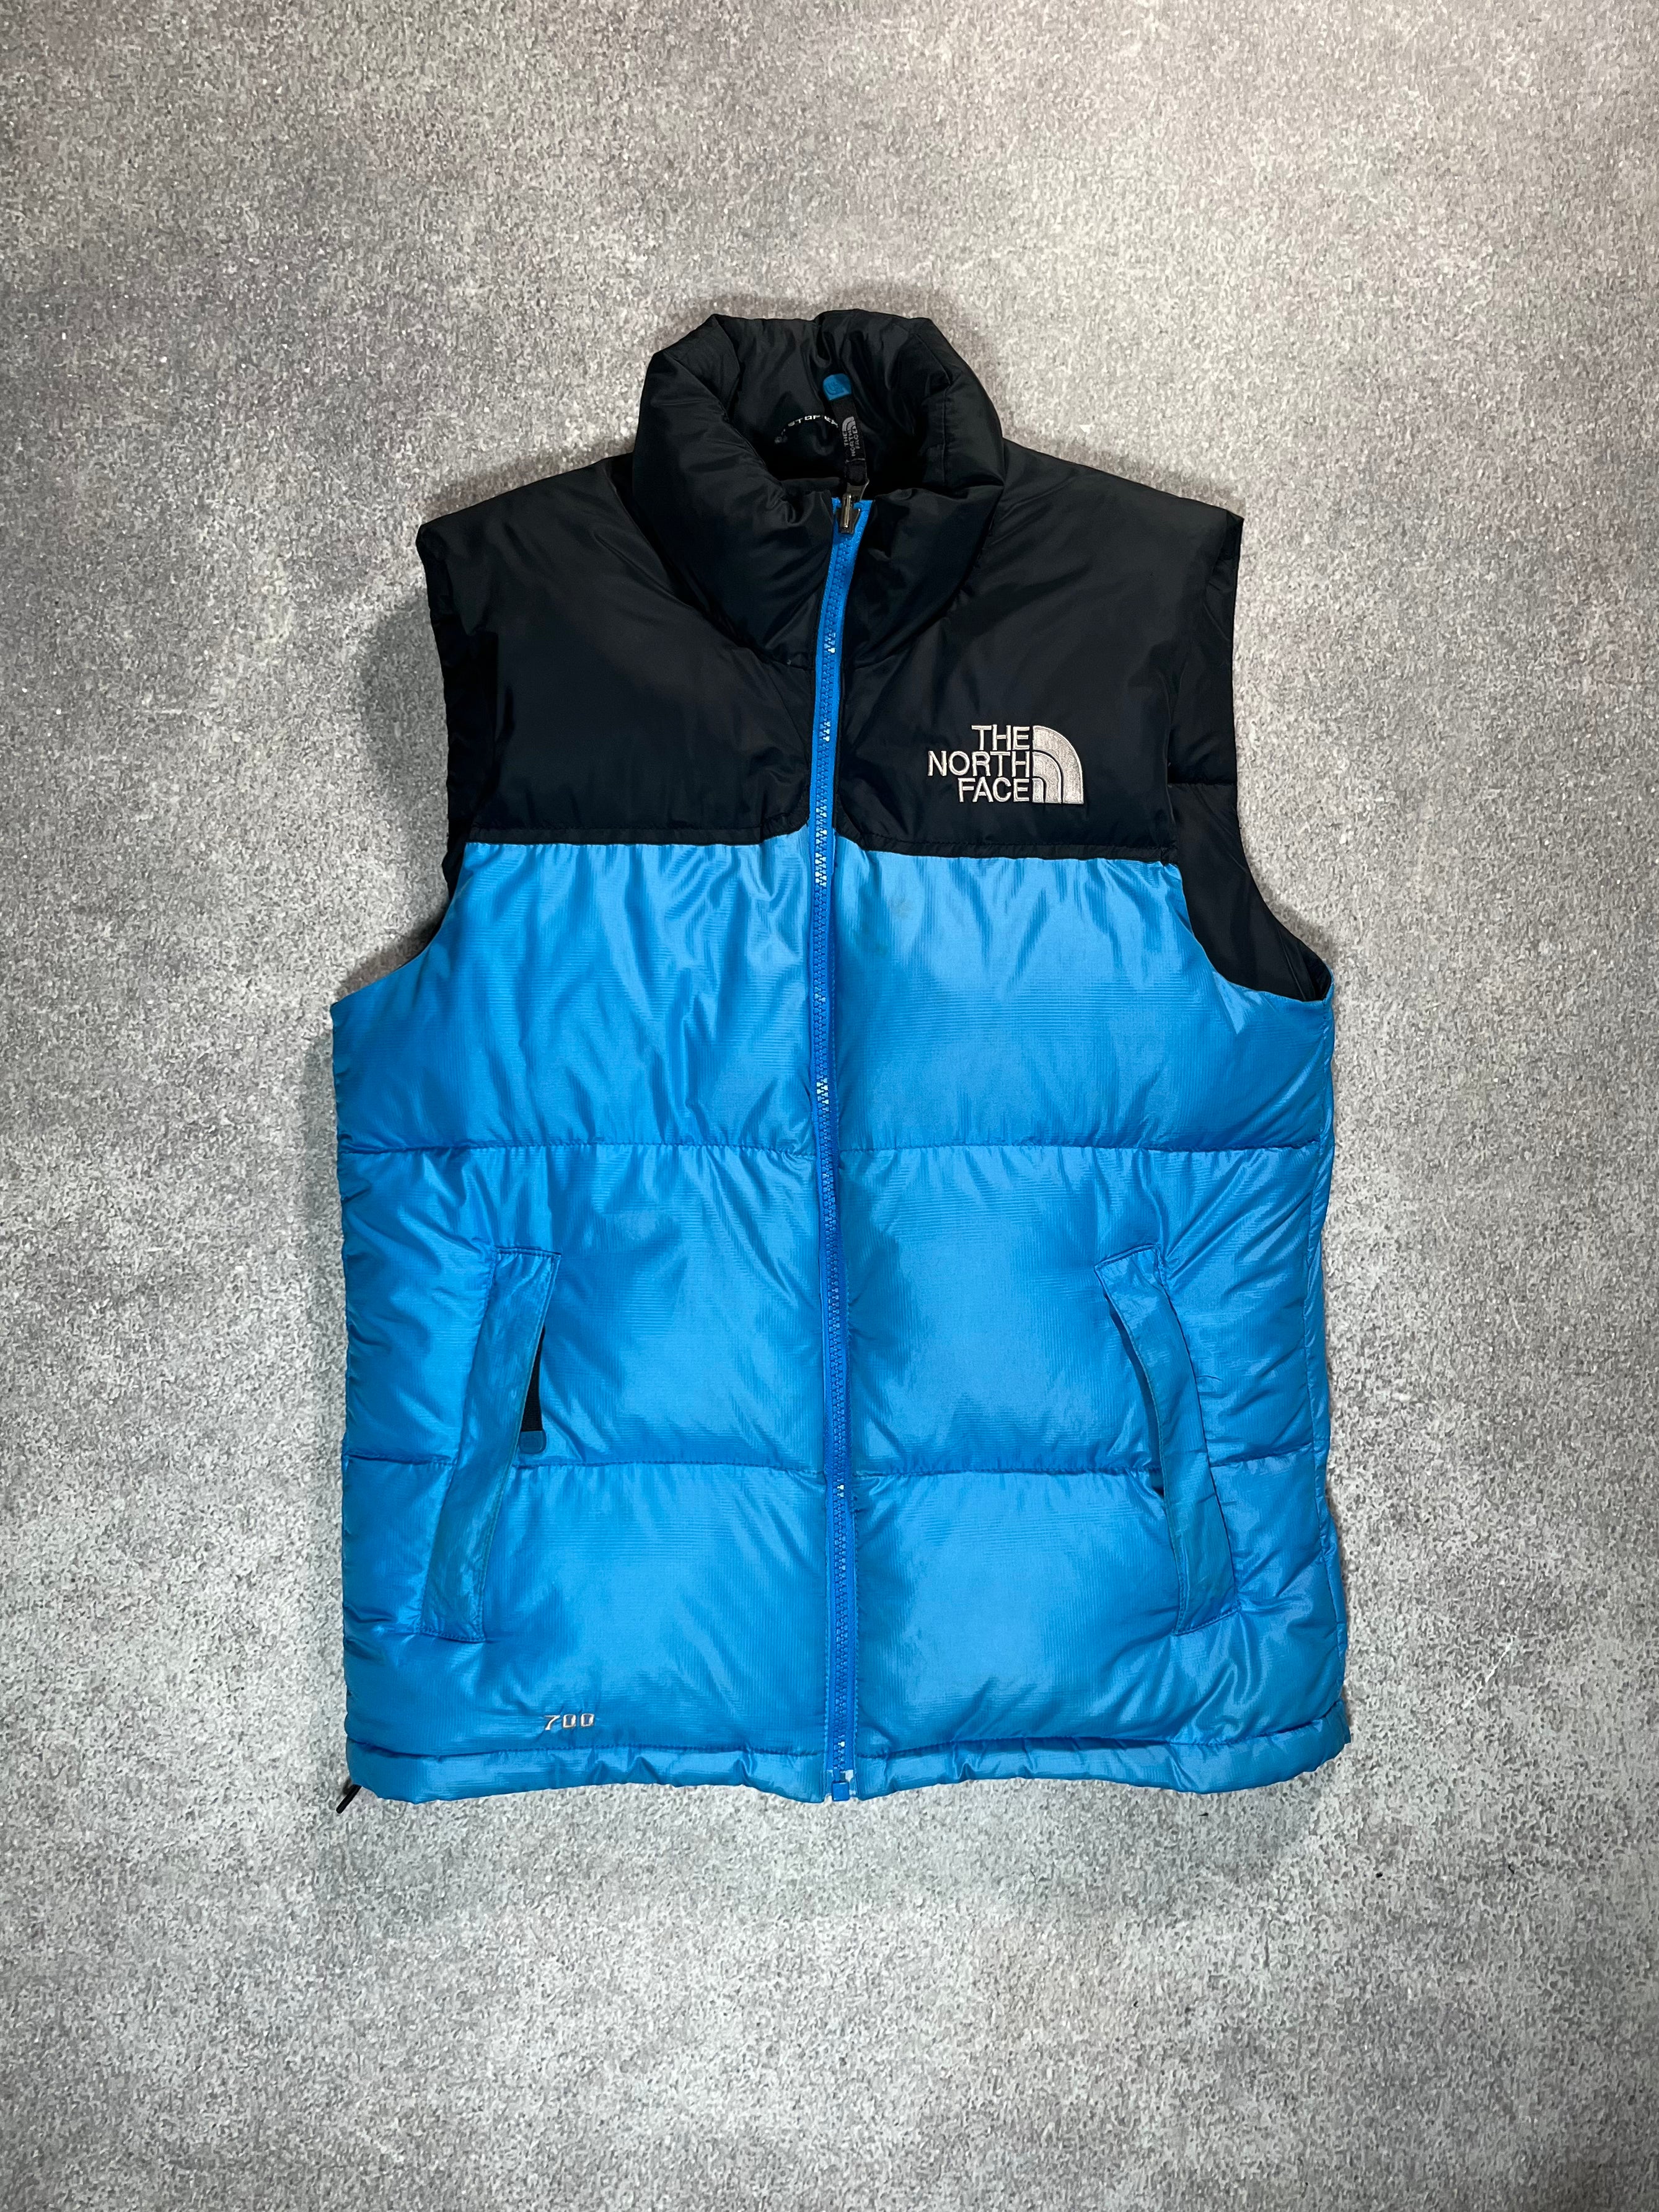 The North Face 700 Puffer Vest Blue // Small - RHAGHOUSE VINTAGE